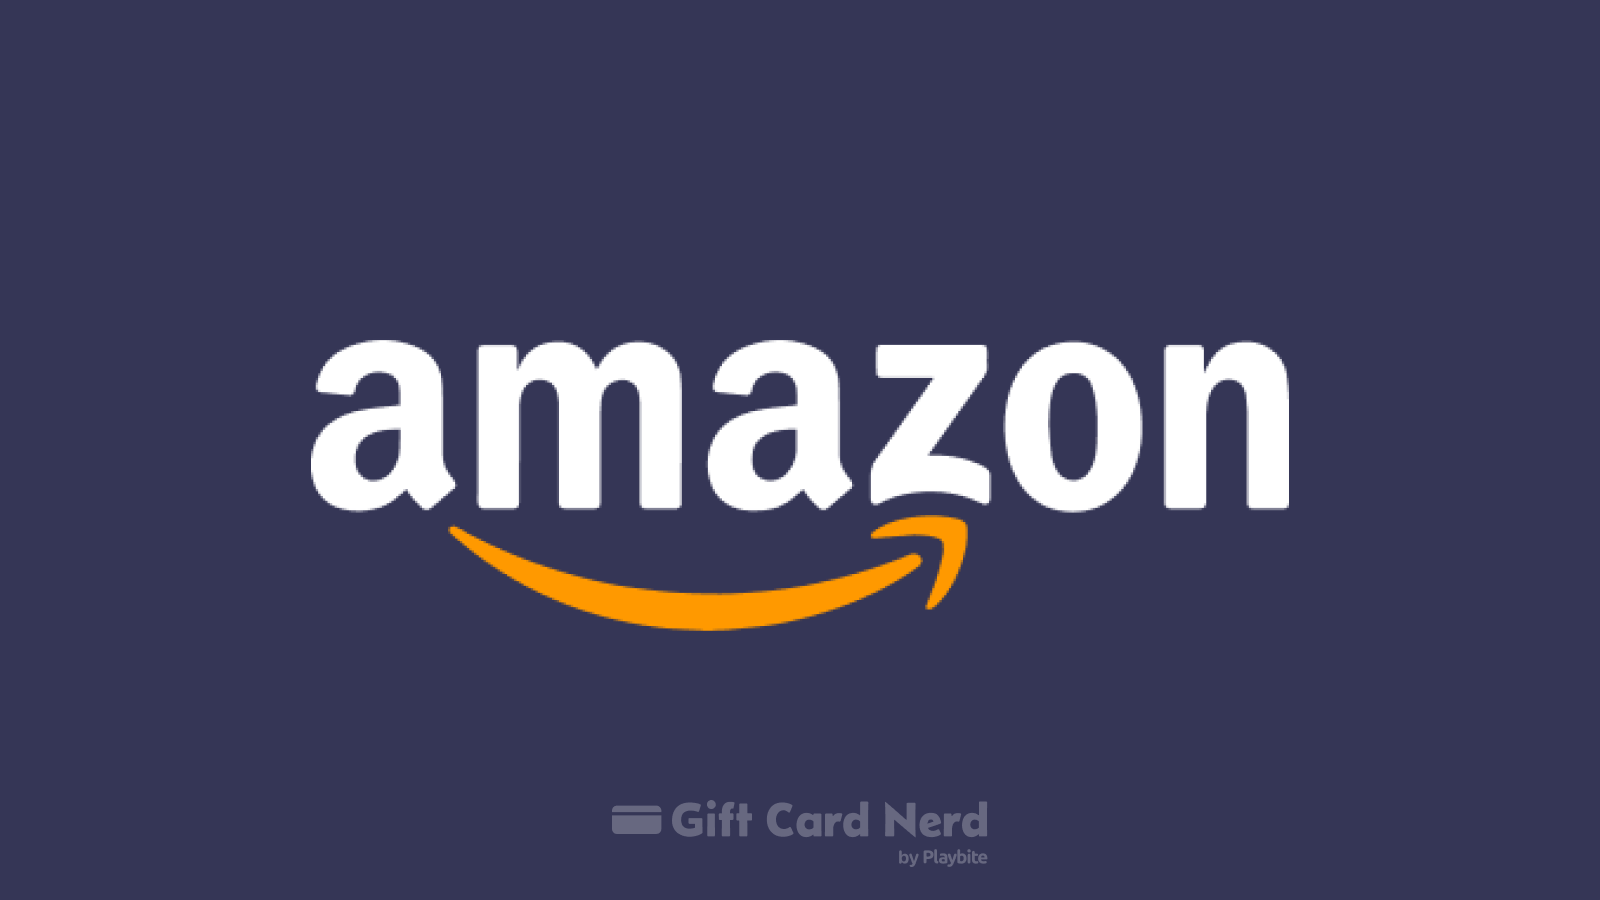 Can I Use an Amazon Gift Card on PayPal?